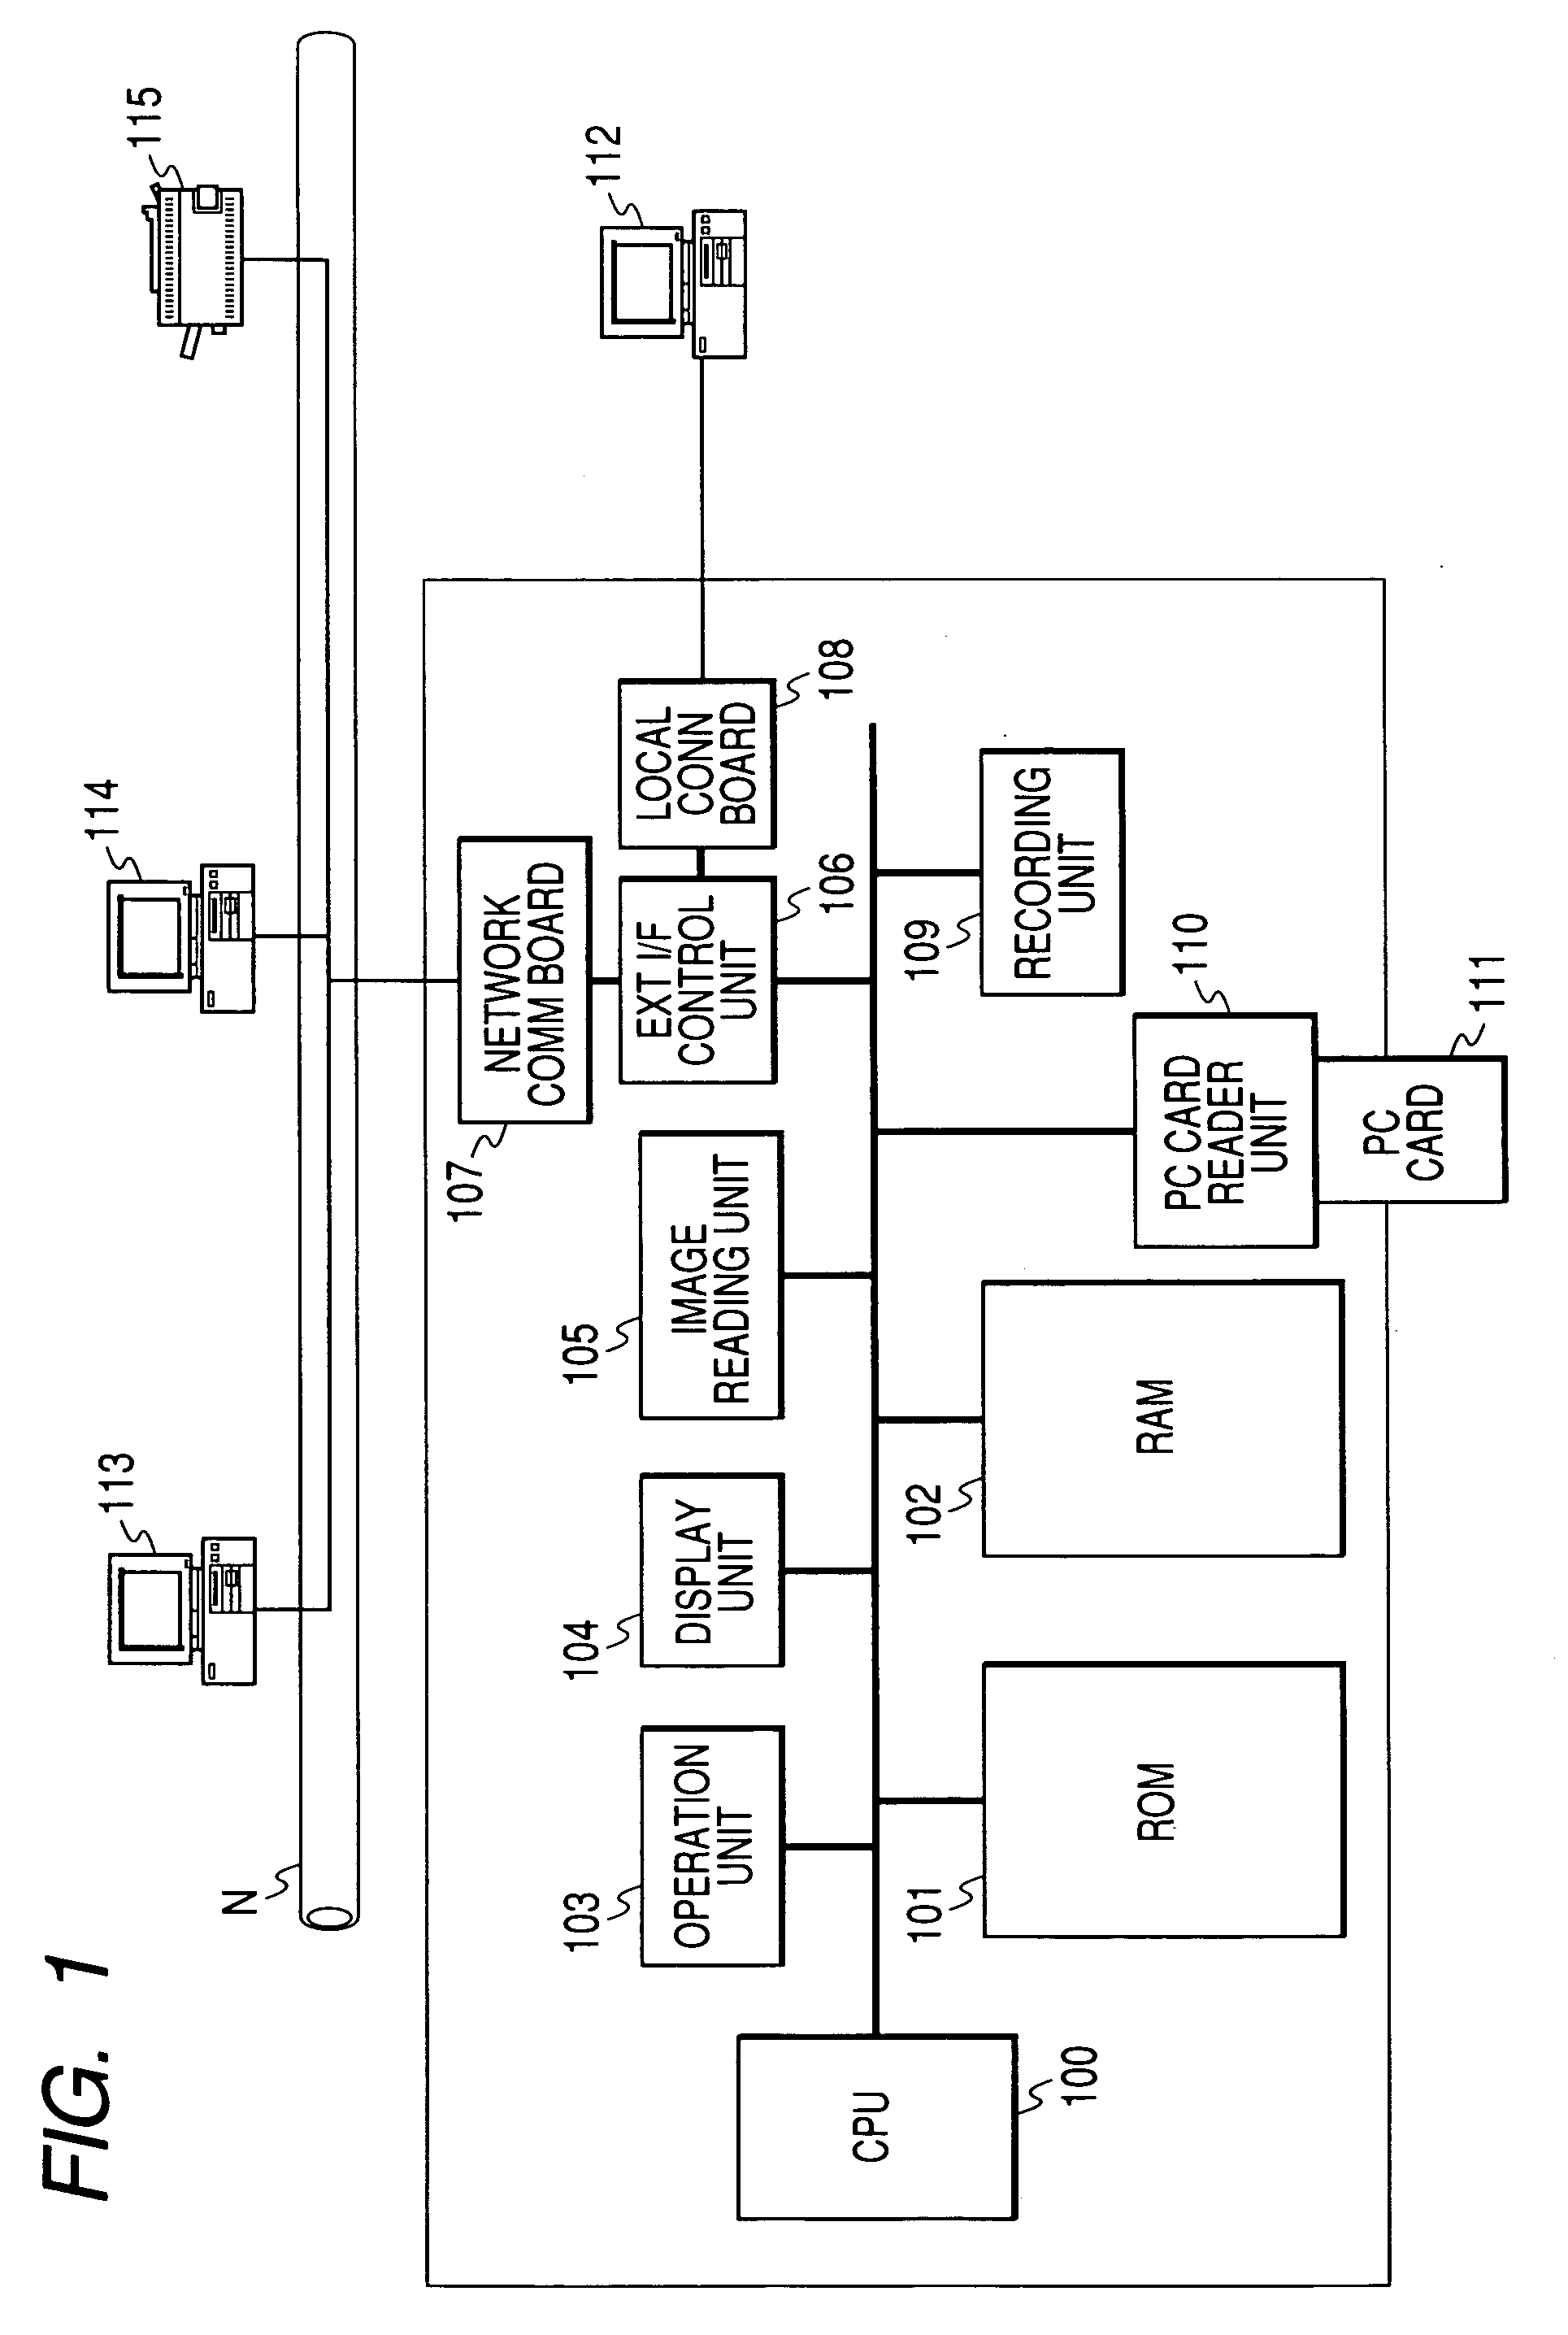 Image processing apparatus, control method for image processing apparatus and control program for image processing apparatus